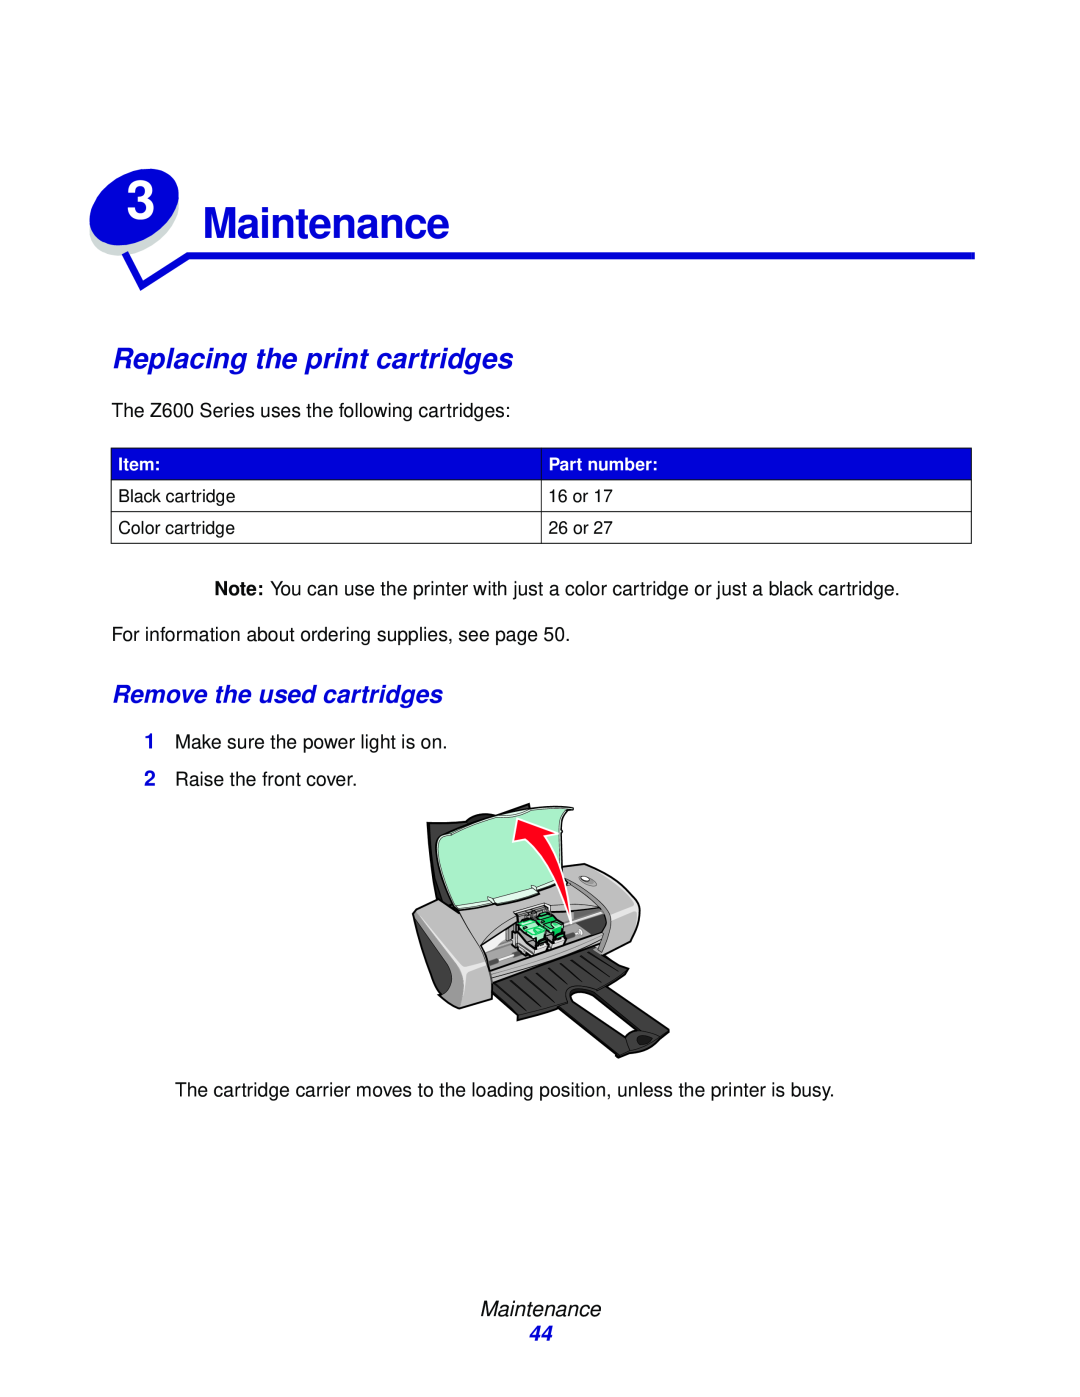 Lexmark Z600 Series manual Maintenance, Replacing the print cartridges, Remove the used cartridges 